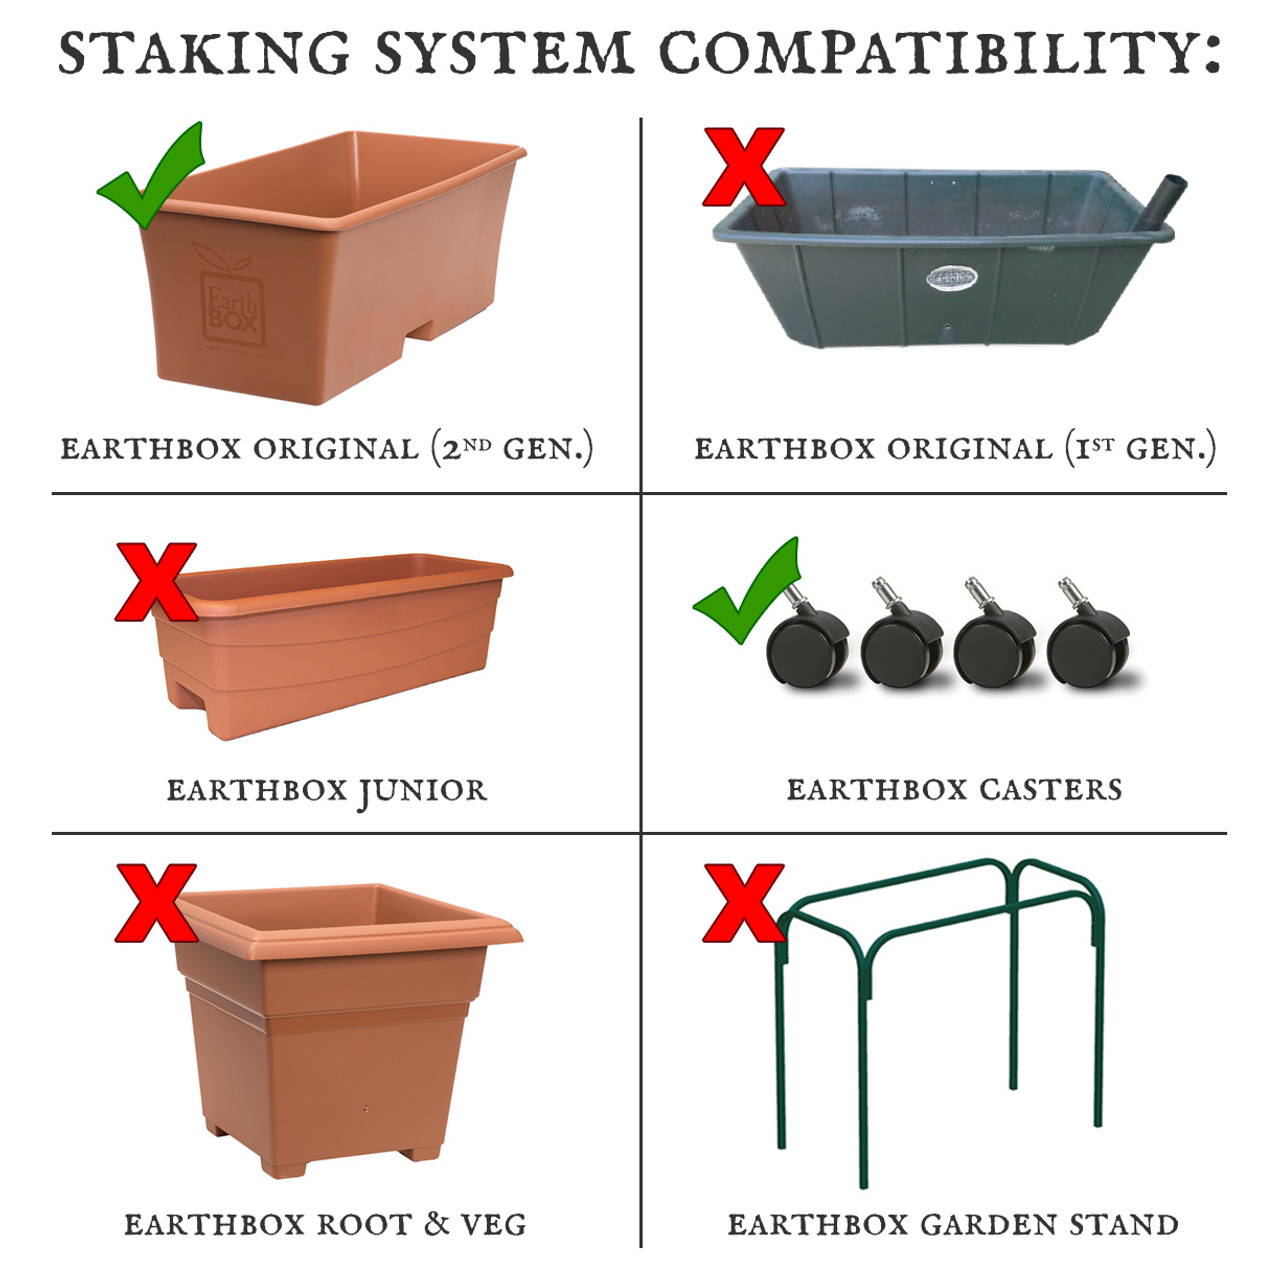 Staking system compatibility chart